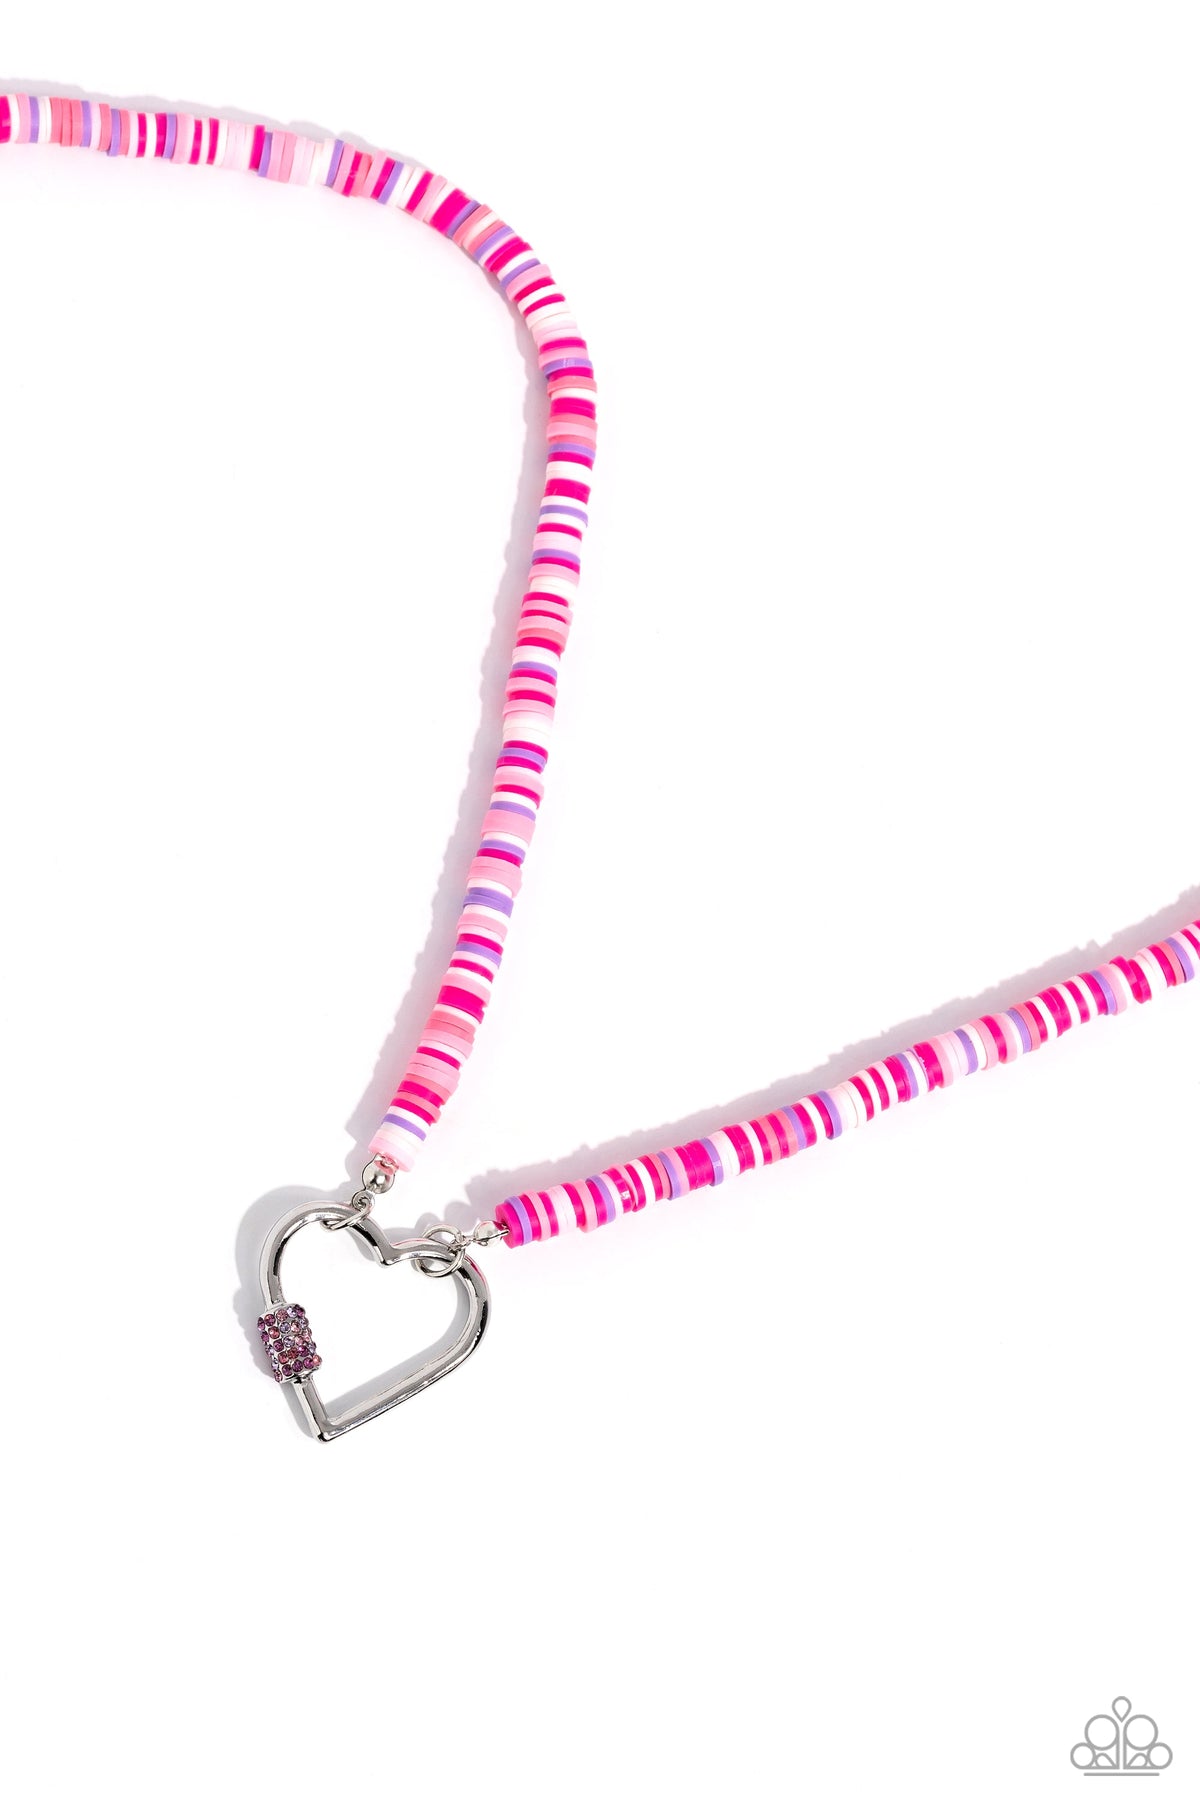 Clearly Carabiner Pink Heart Necklace - Paparazzi Accessories- lightbox - CarasShop.com - $5 Jewelry by Cara Jewels